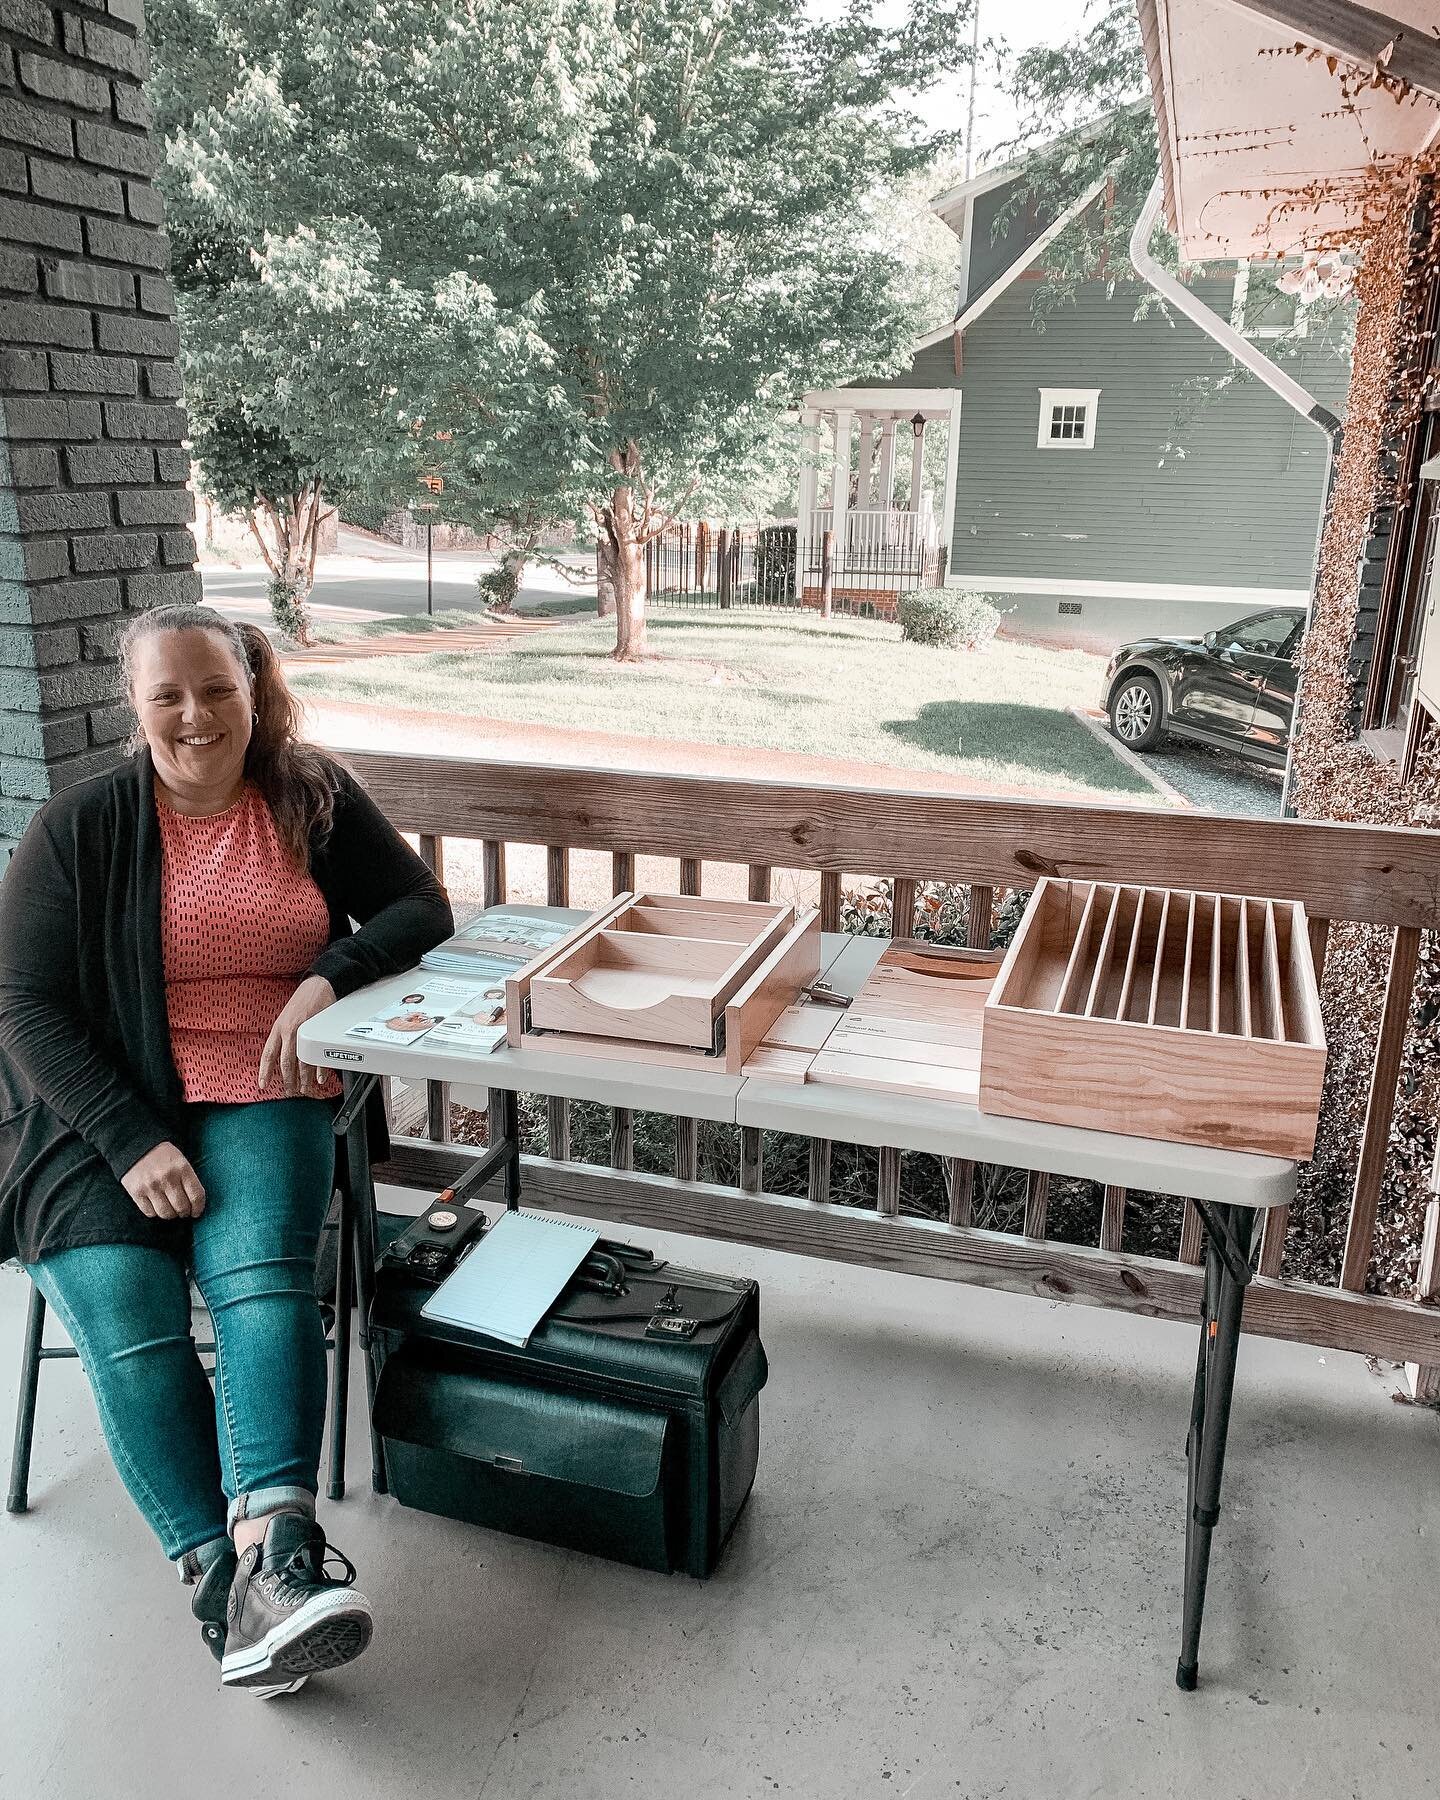 We hope you enjoyed our amazing vendor, Jenny, at our feel Good Friday today!

Jenny Pierce is an organize and declutter specialist who is partnering with @ArtofDrawers.

Art of Drawers allows her the ability to provide custom space and organizing so